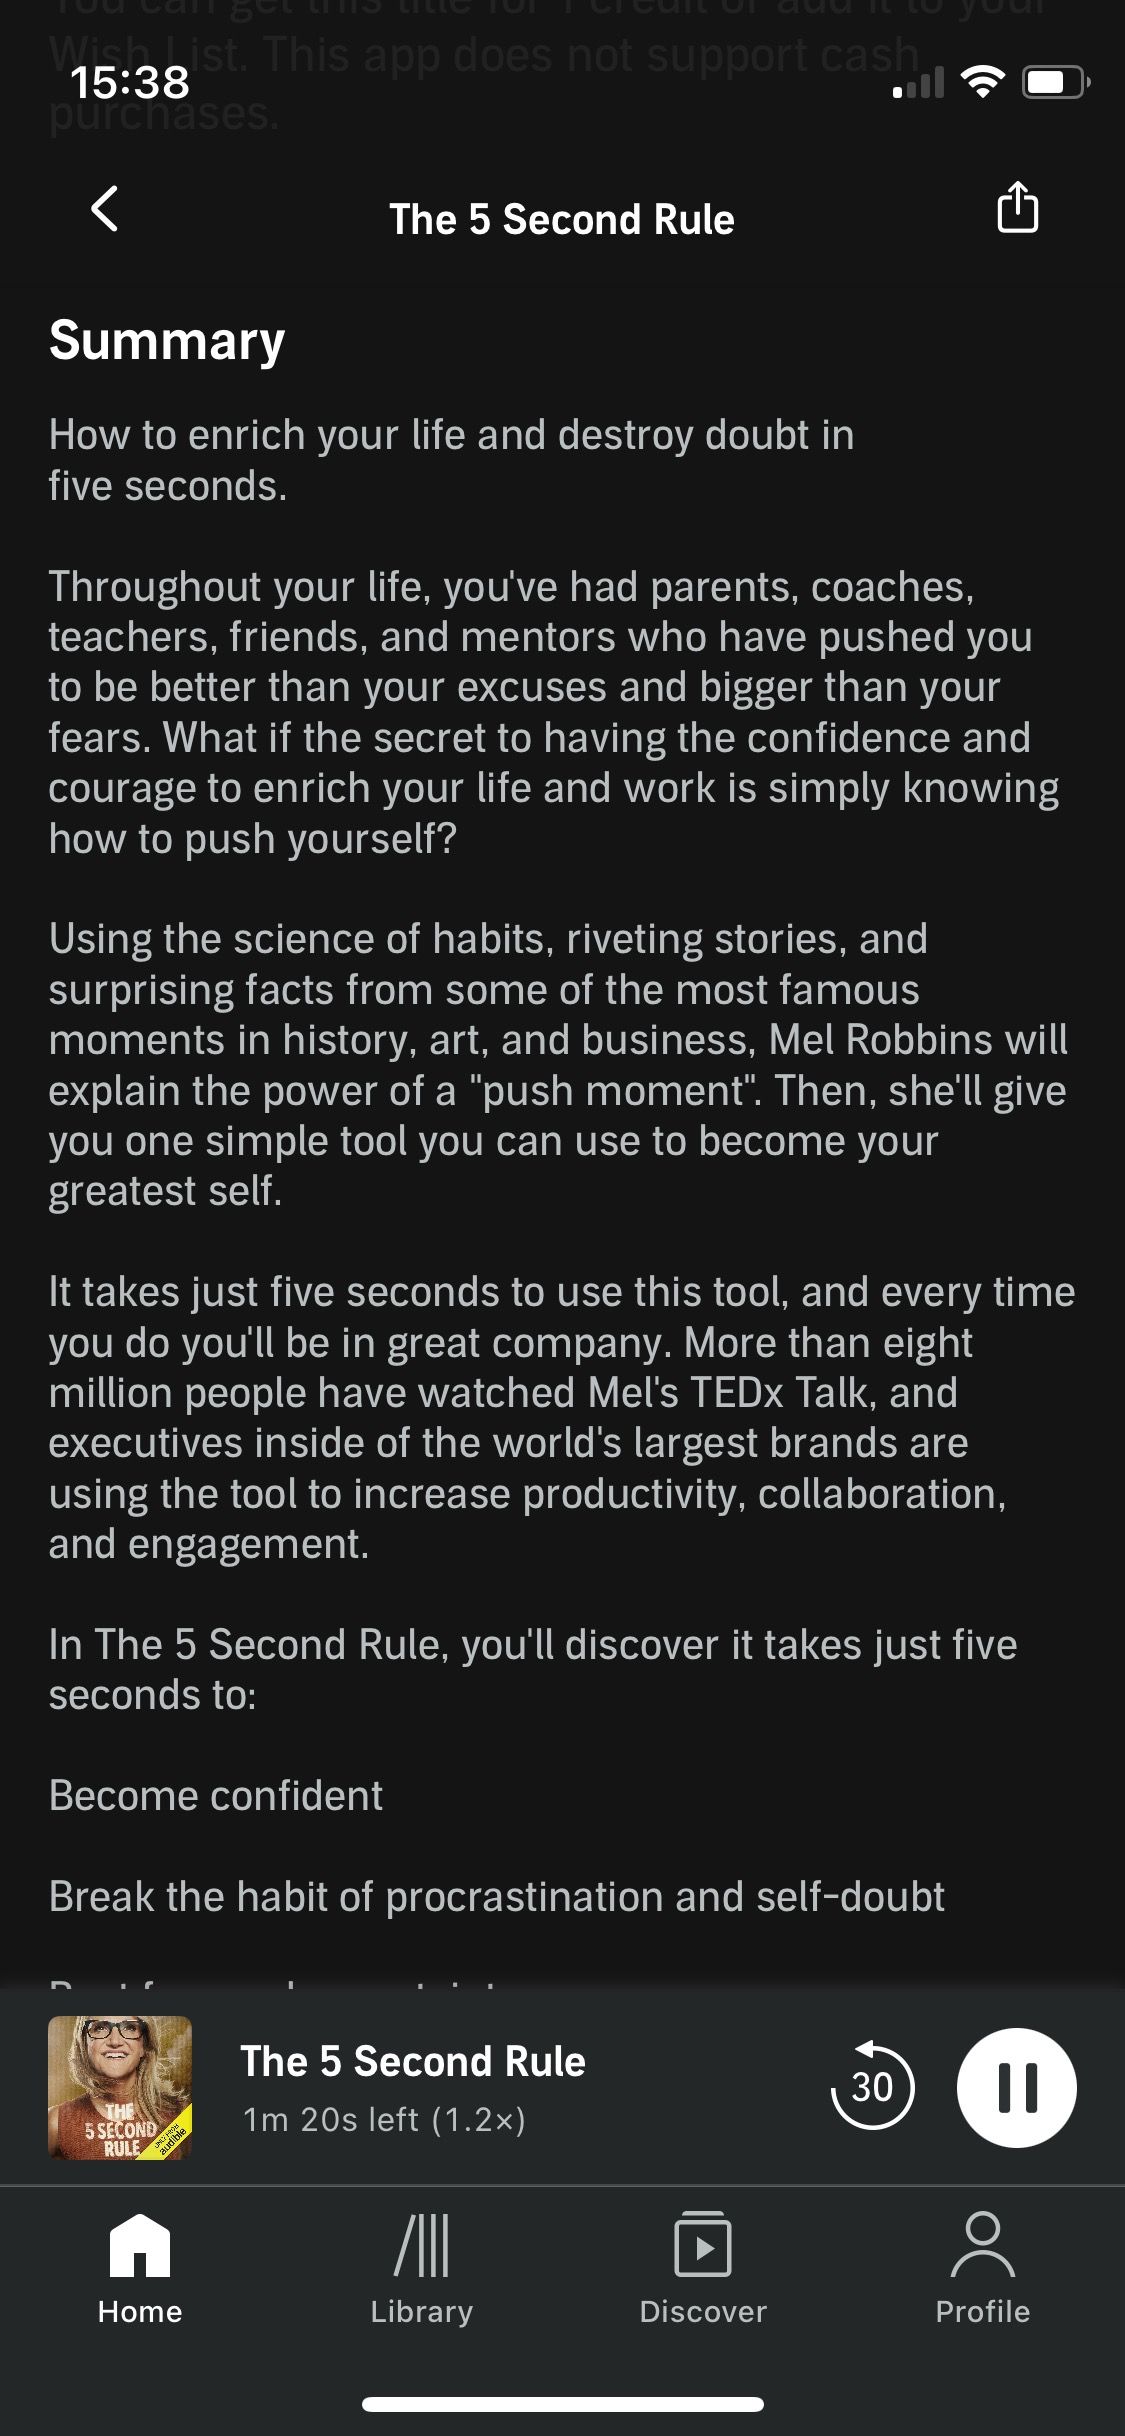 Audible information page for The 5 Second Rule by Mel Robbins